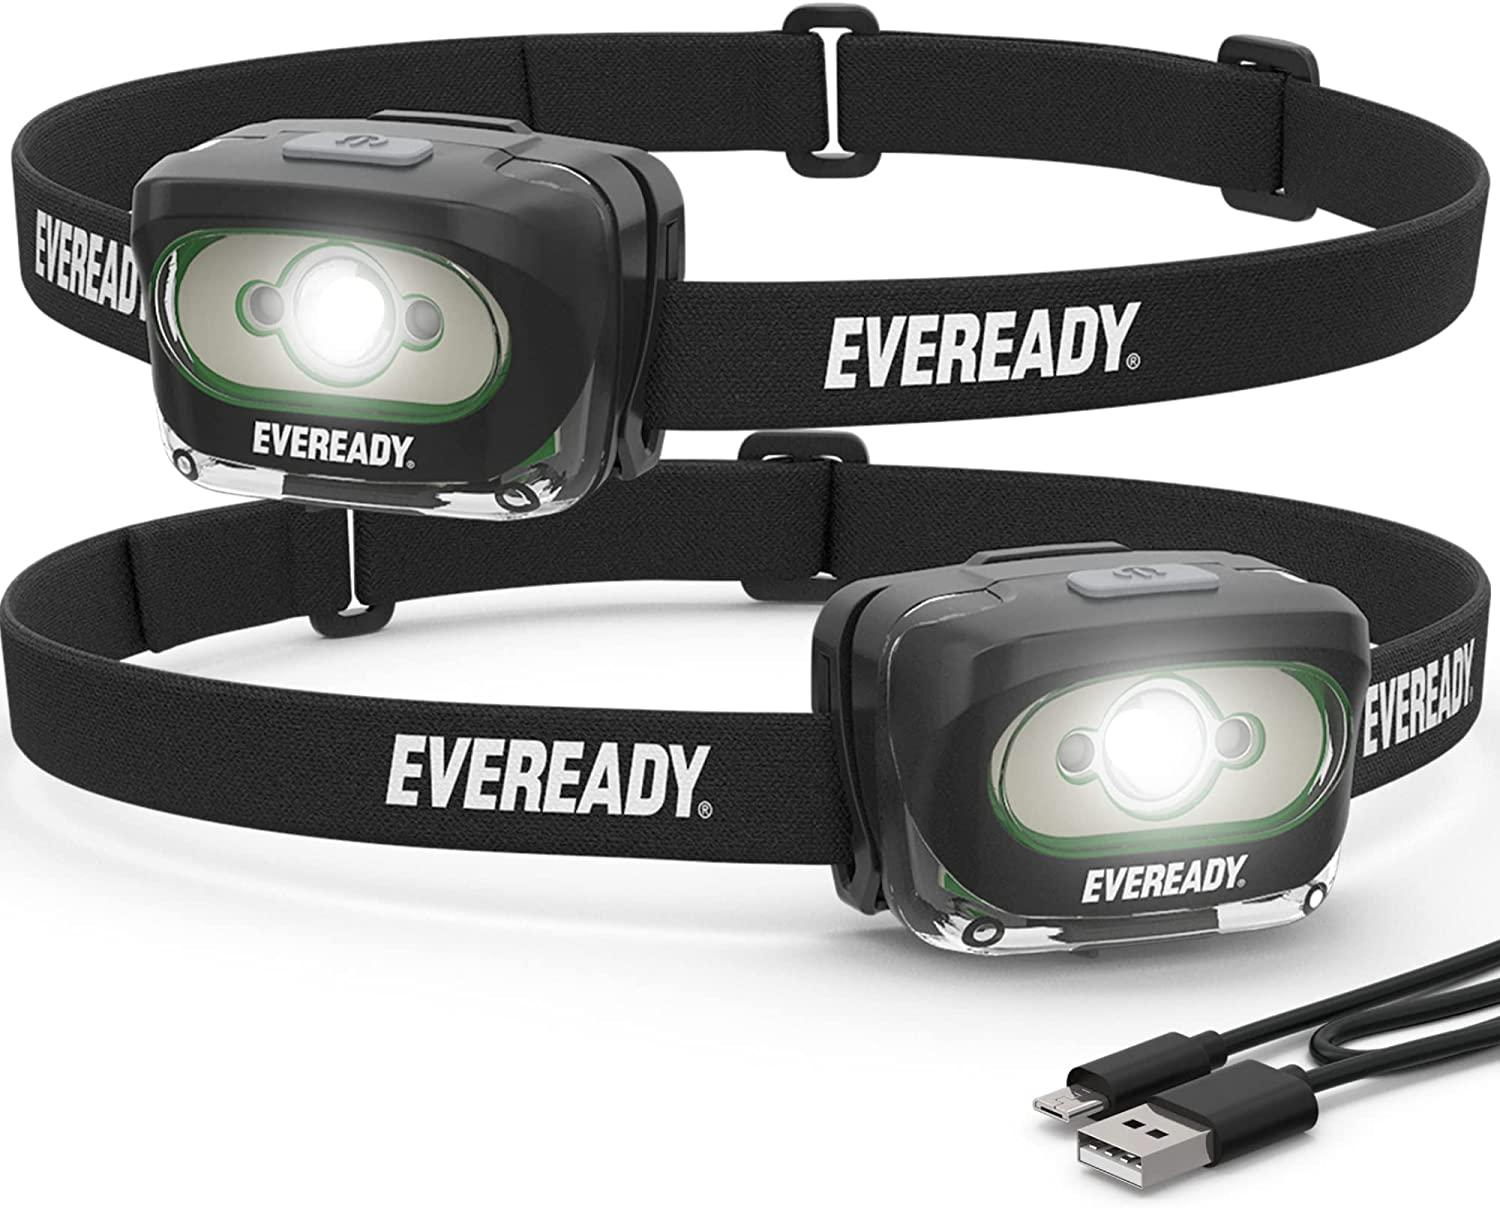 Eveready Rechargeable IPX4 Water Resistant LED Headlamps 2 Pack for $9.85